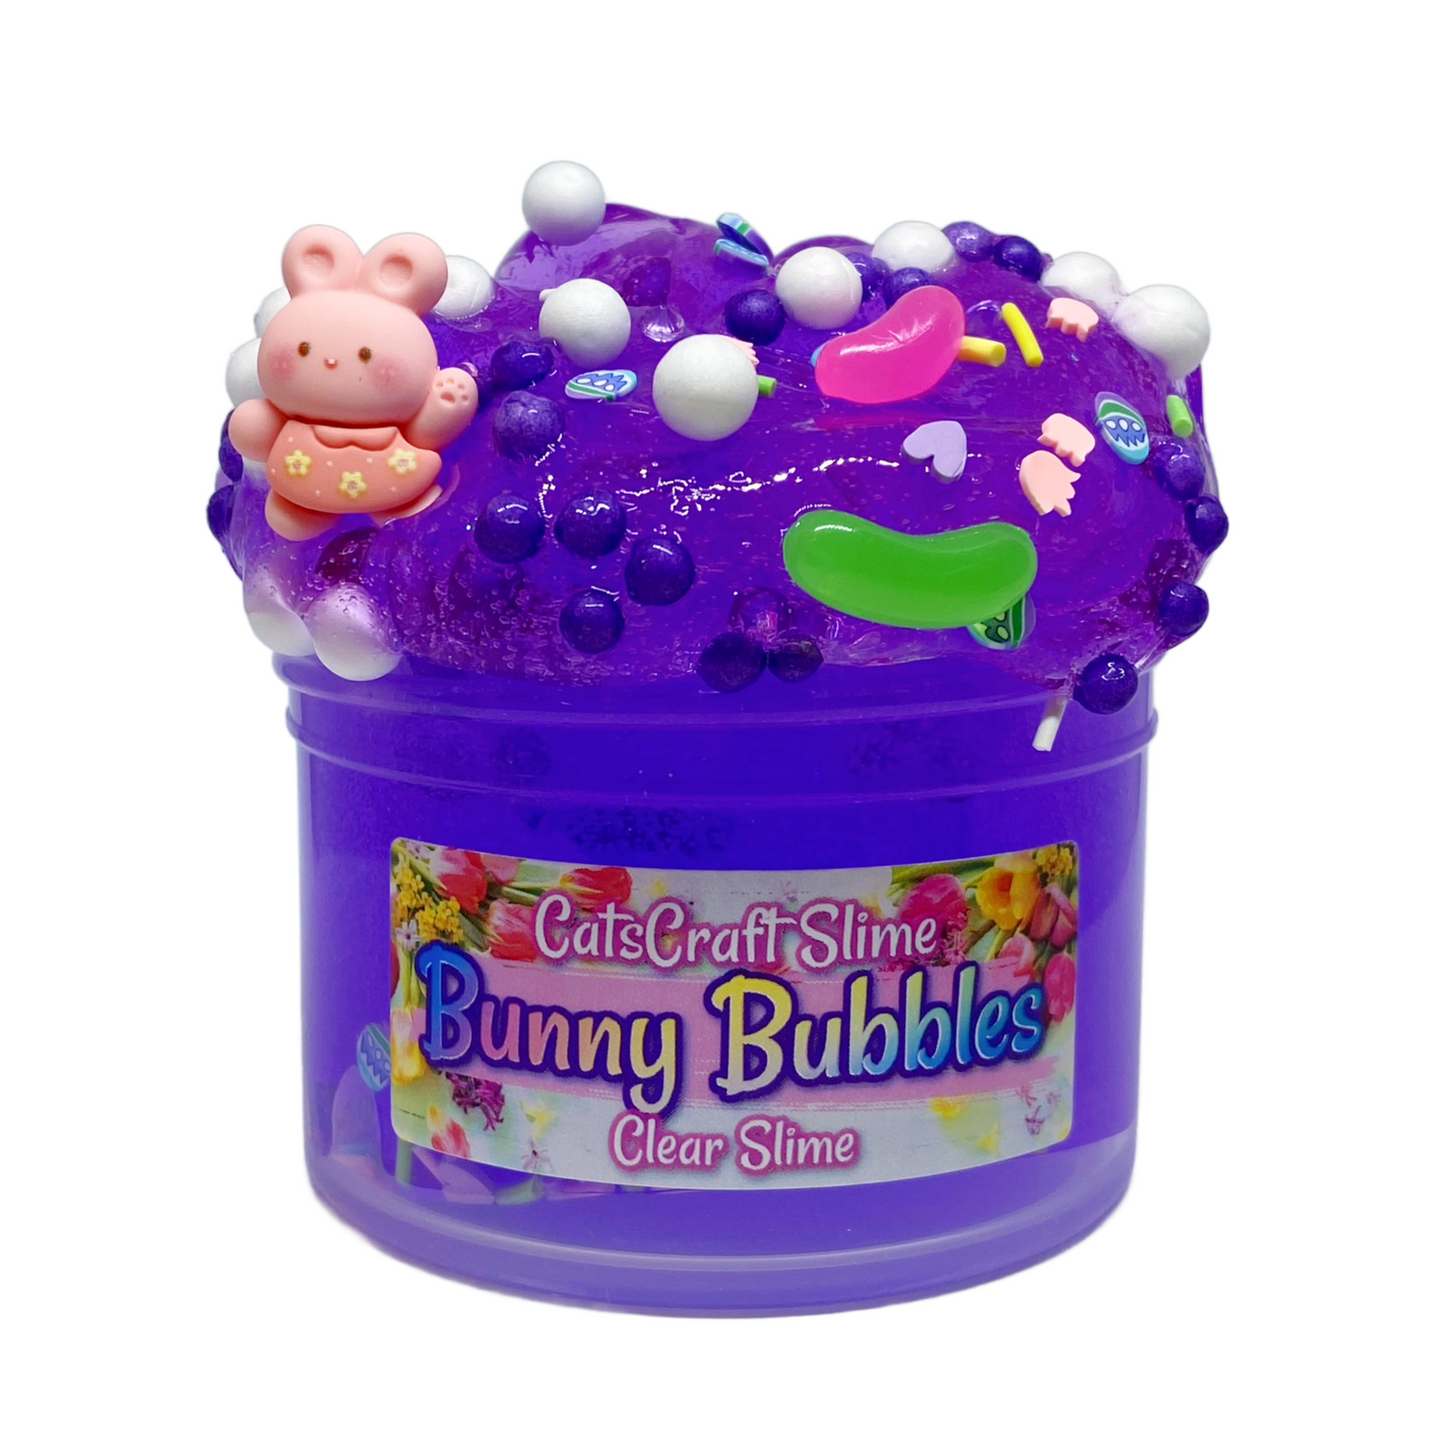 Clear Slime "Bunny Bubbles" Scented Stretchy Easter Slime ASMR 6 oz